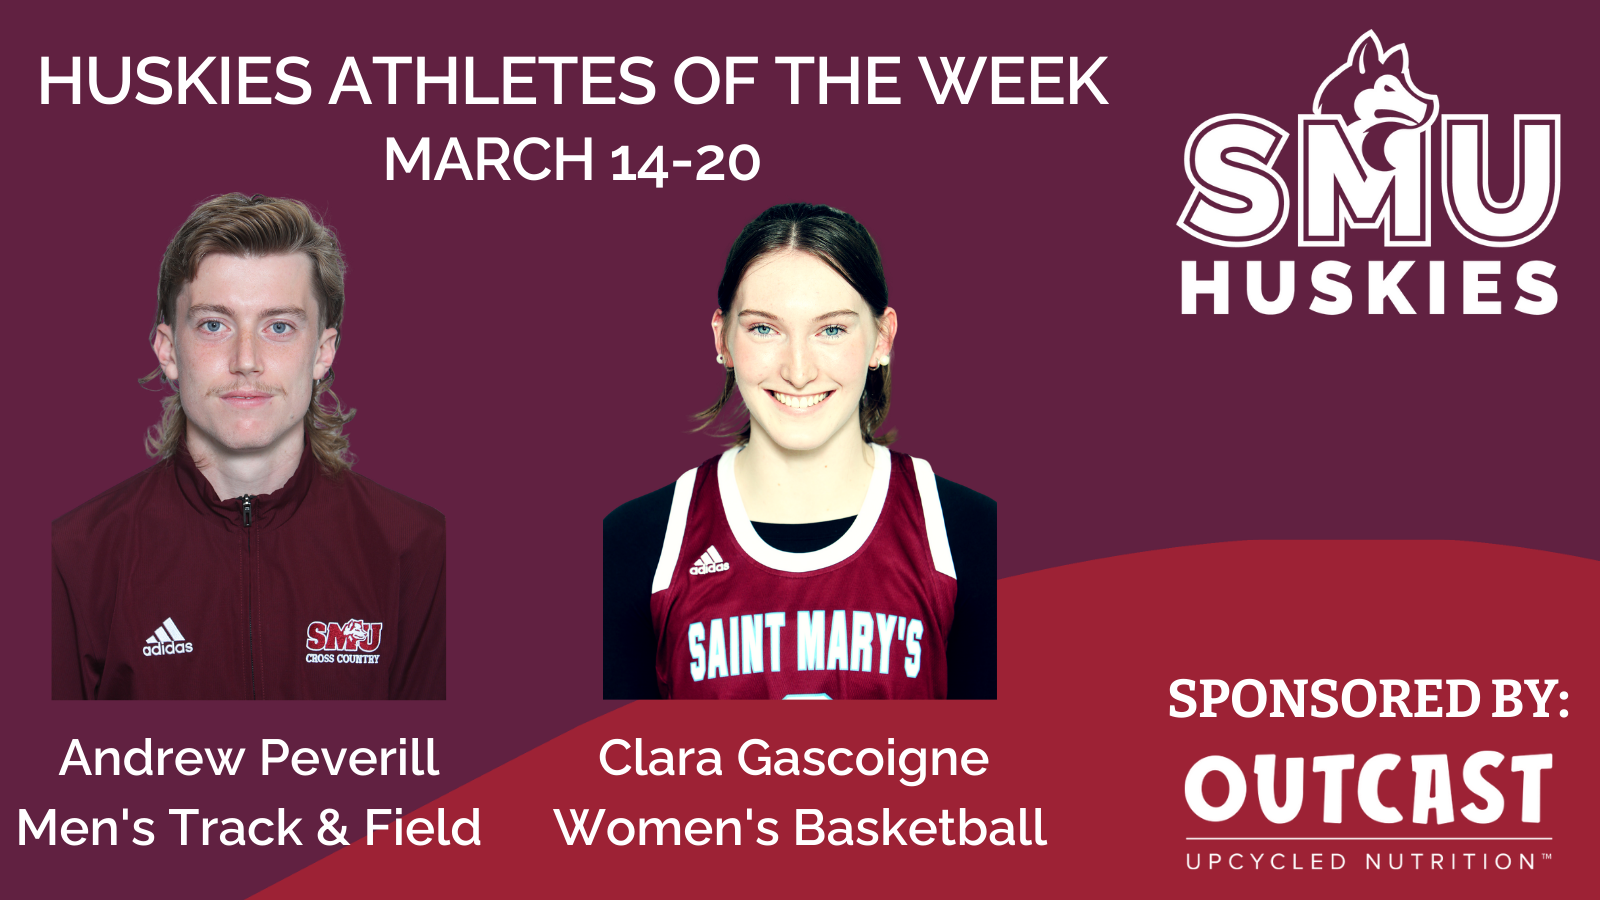 Peverill, Gascoigne named Huskies Athletes of the Week: March 14-20